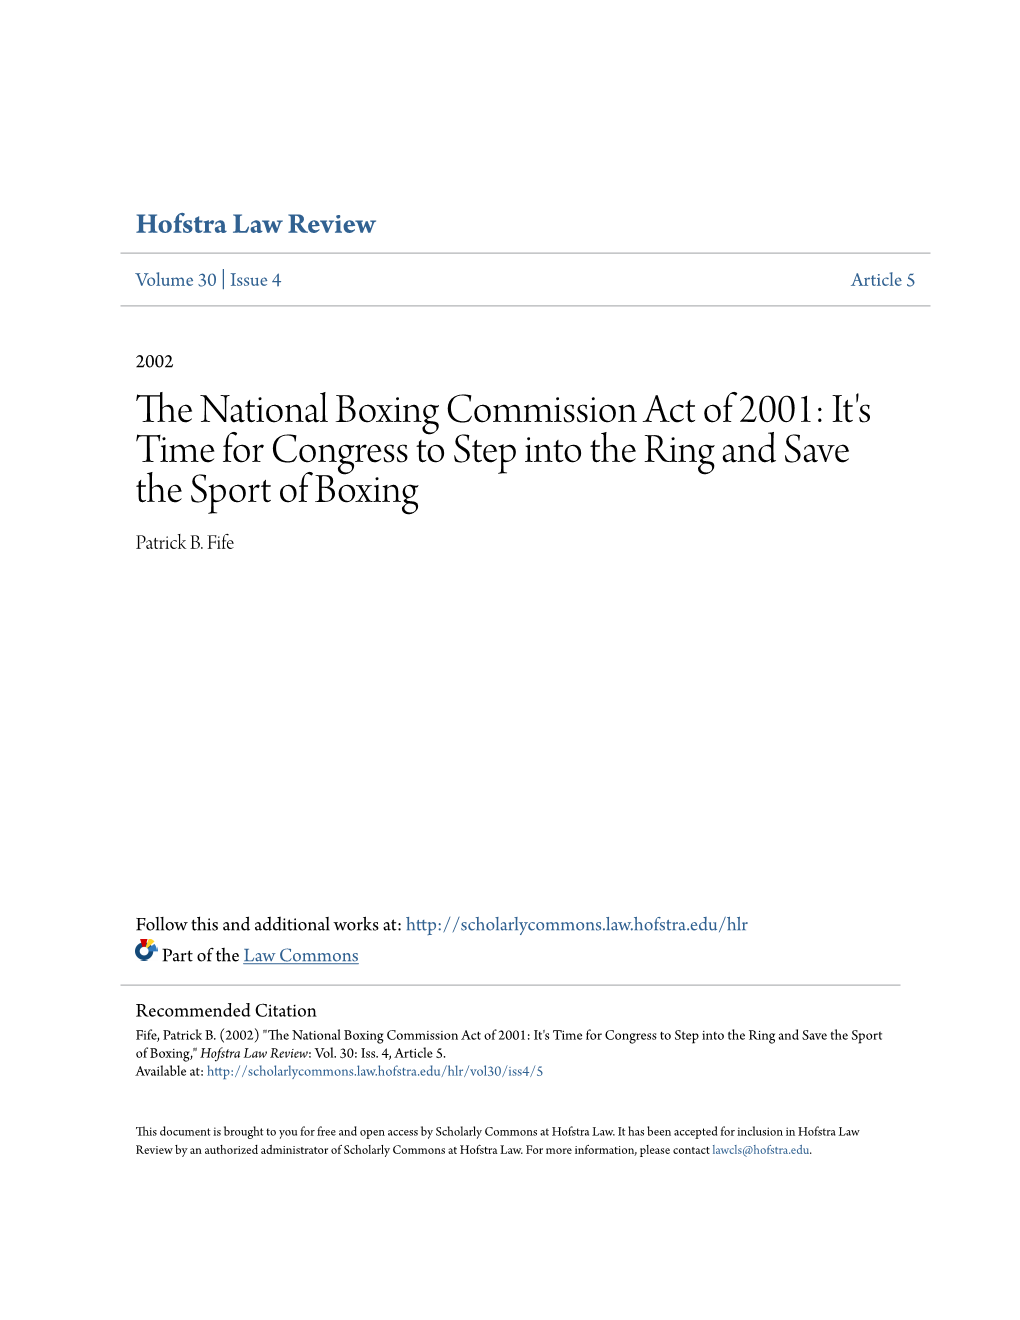 The National Boxing Commission Act of 2001: It's Time for Congres